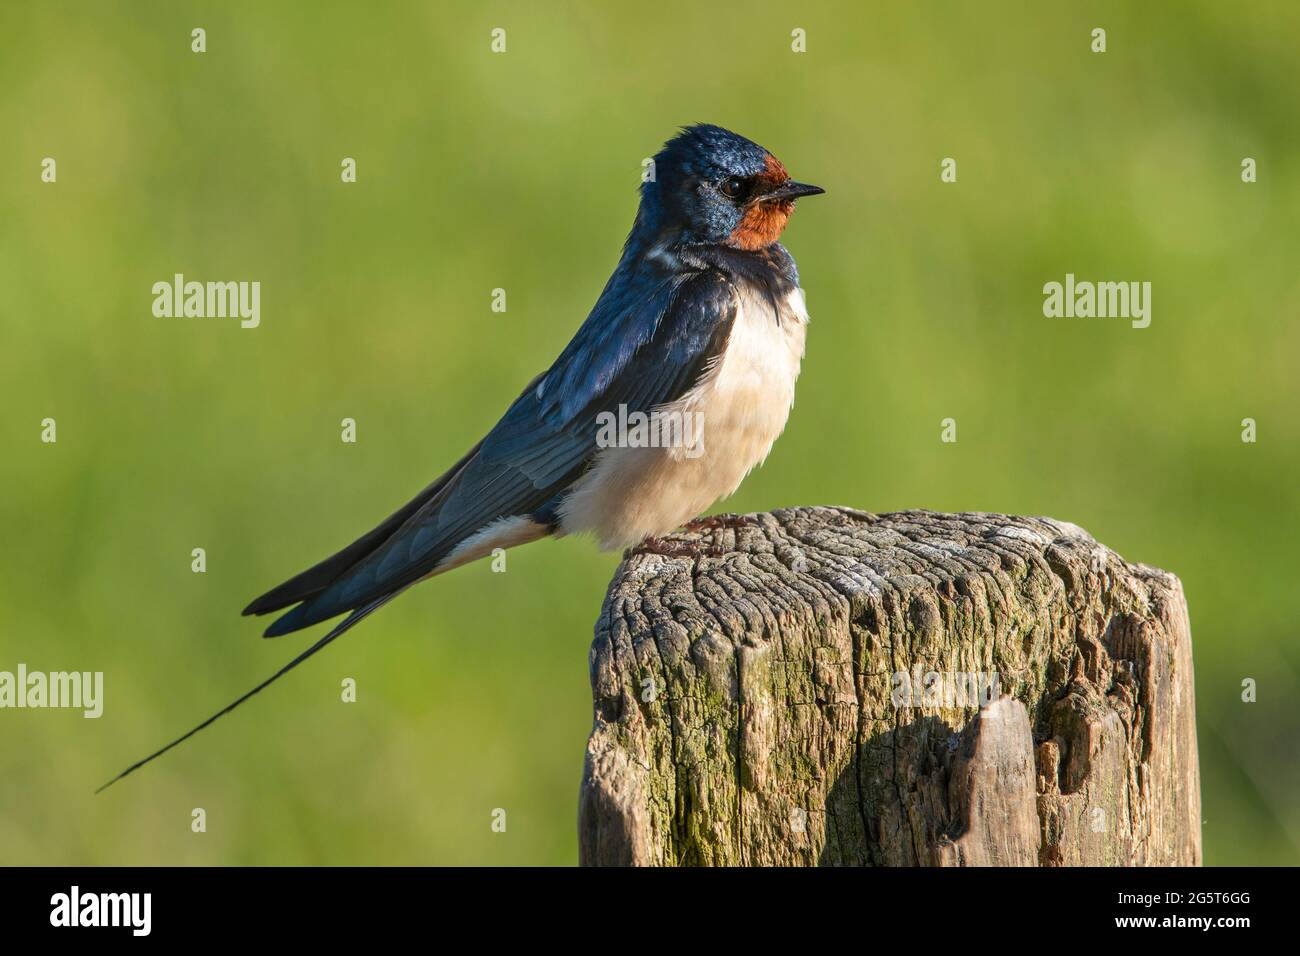 barn swallow (Hirundo rustica), perched on a wooden post, Germany, Lower Saxony Stock Photo